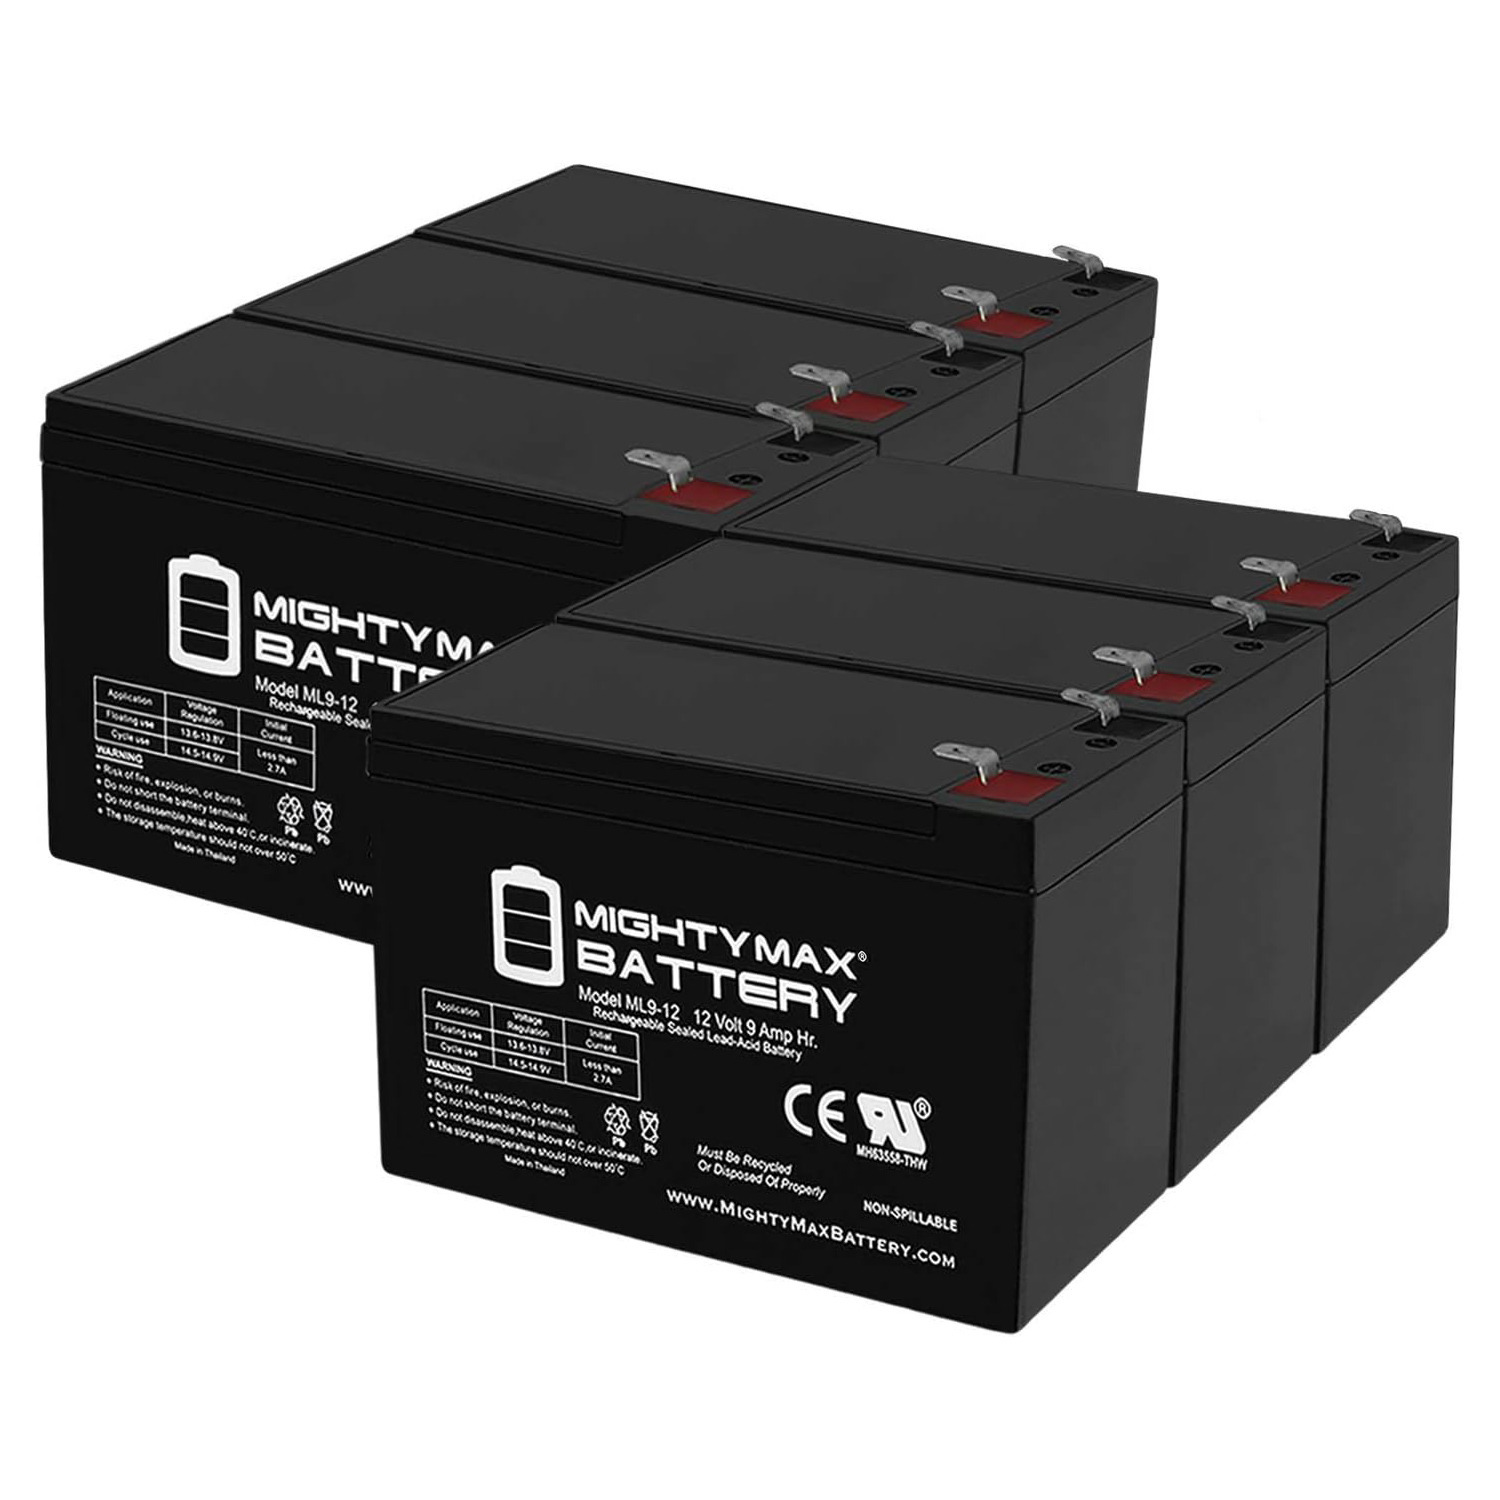 Altronix SMP3PMCTXPD8 12V, 9Ah Lead Acid Battery - 6 Pack